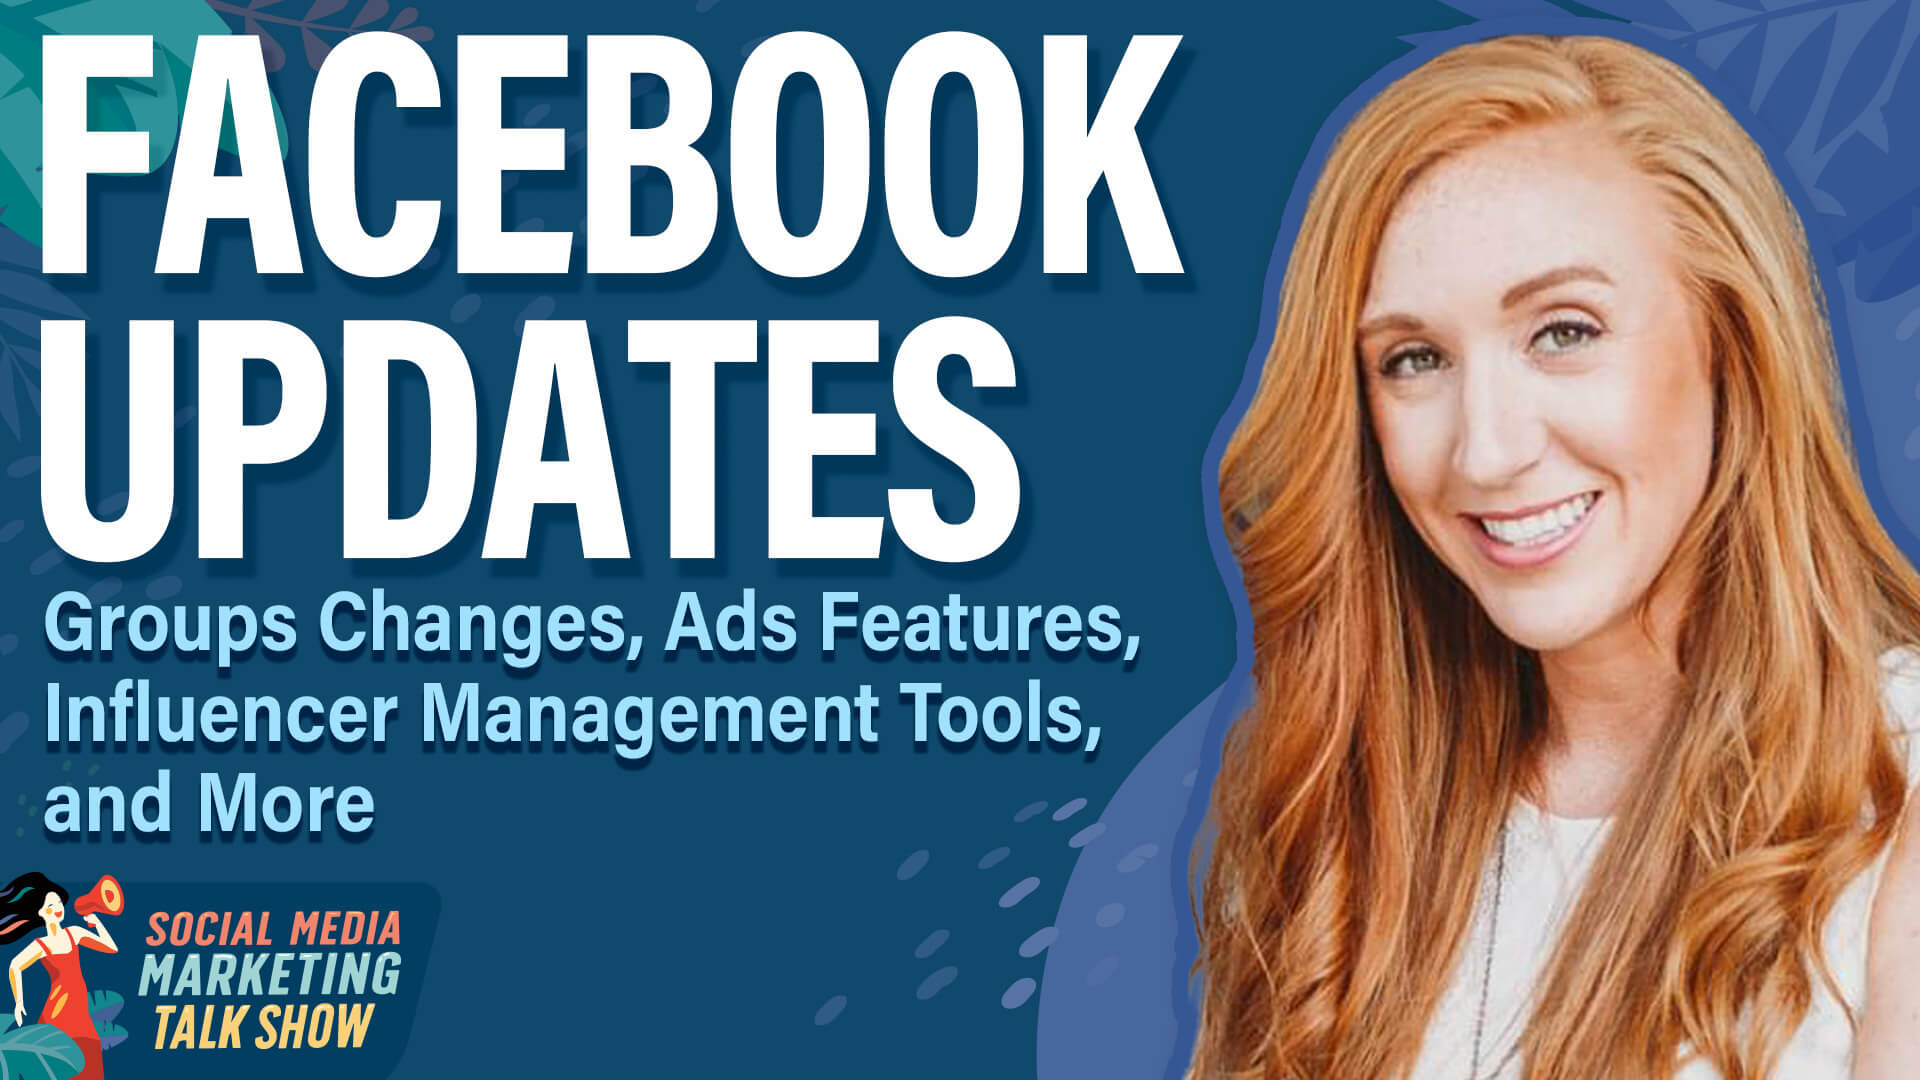 Facebook Updates: Groups Changes, Ads Features, Influencer Management, and More by Social Media Examiner